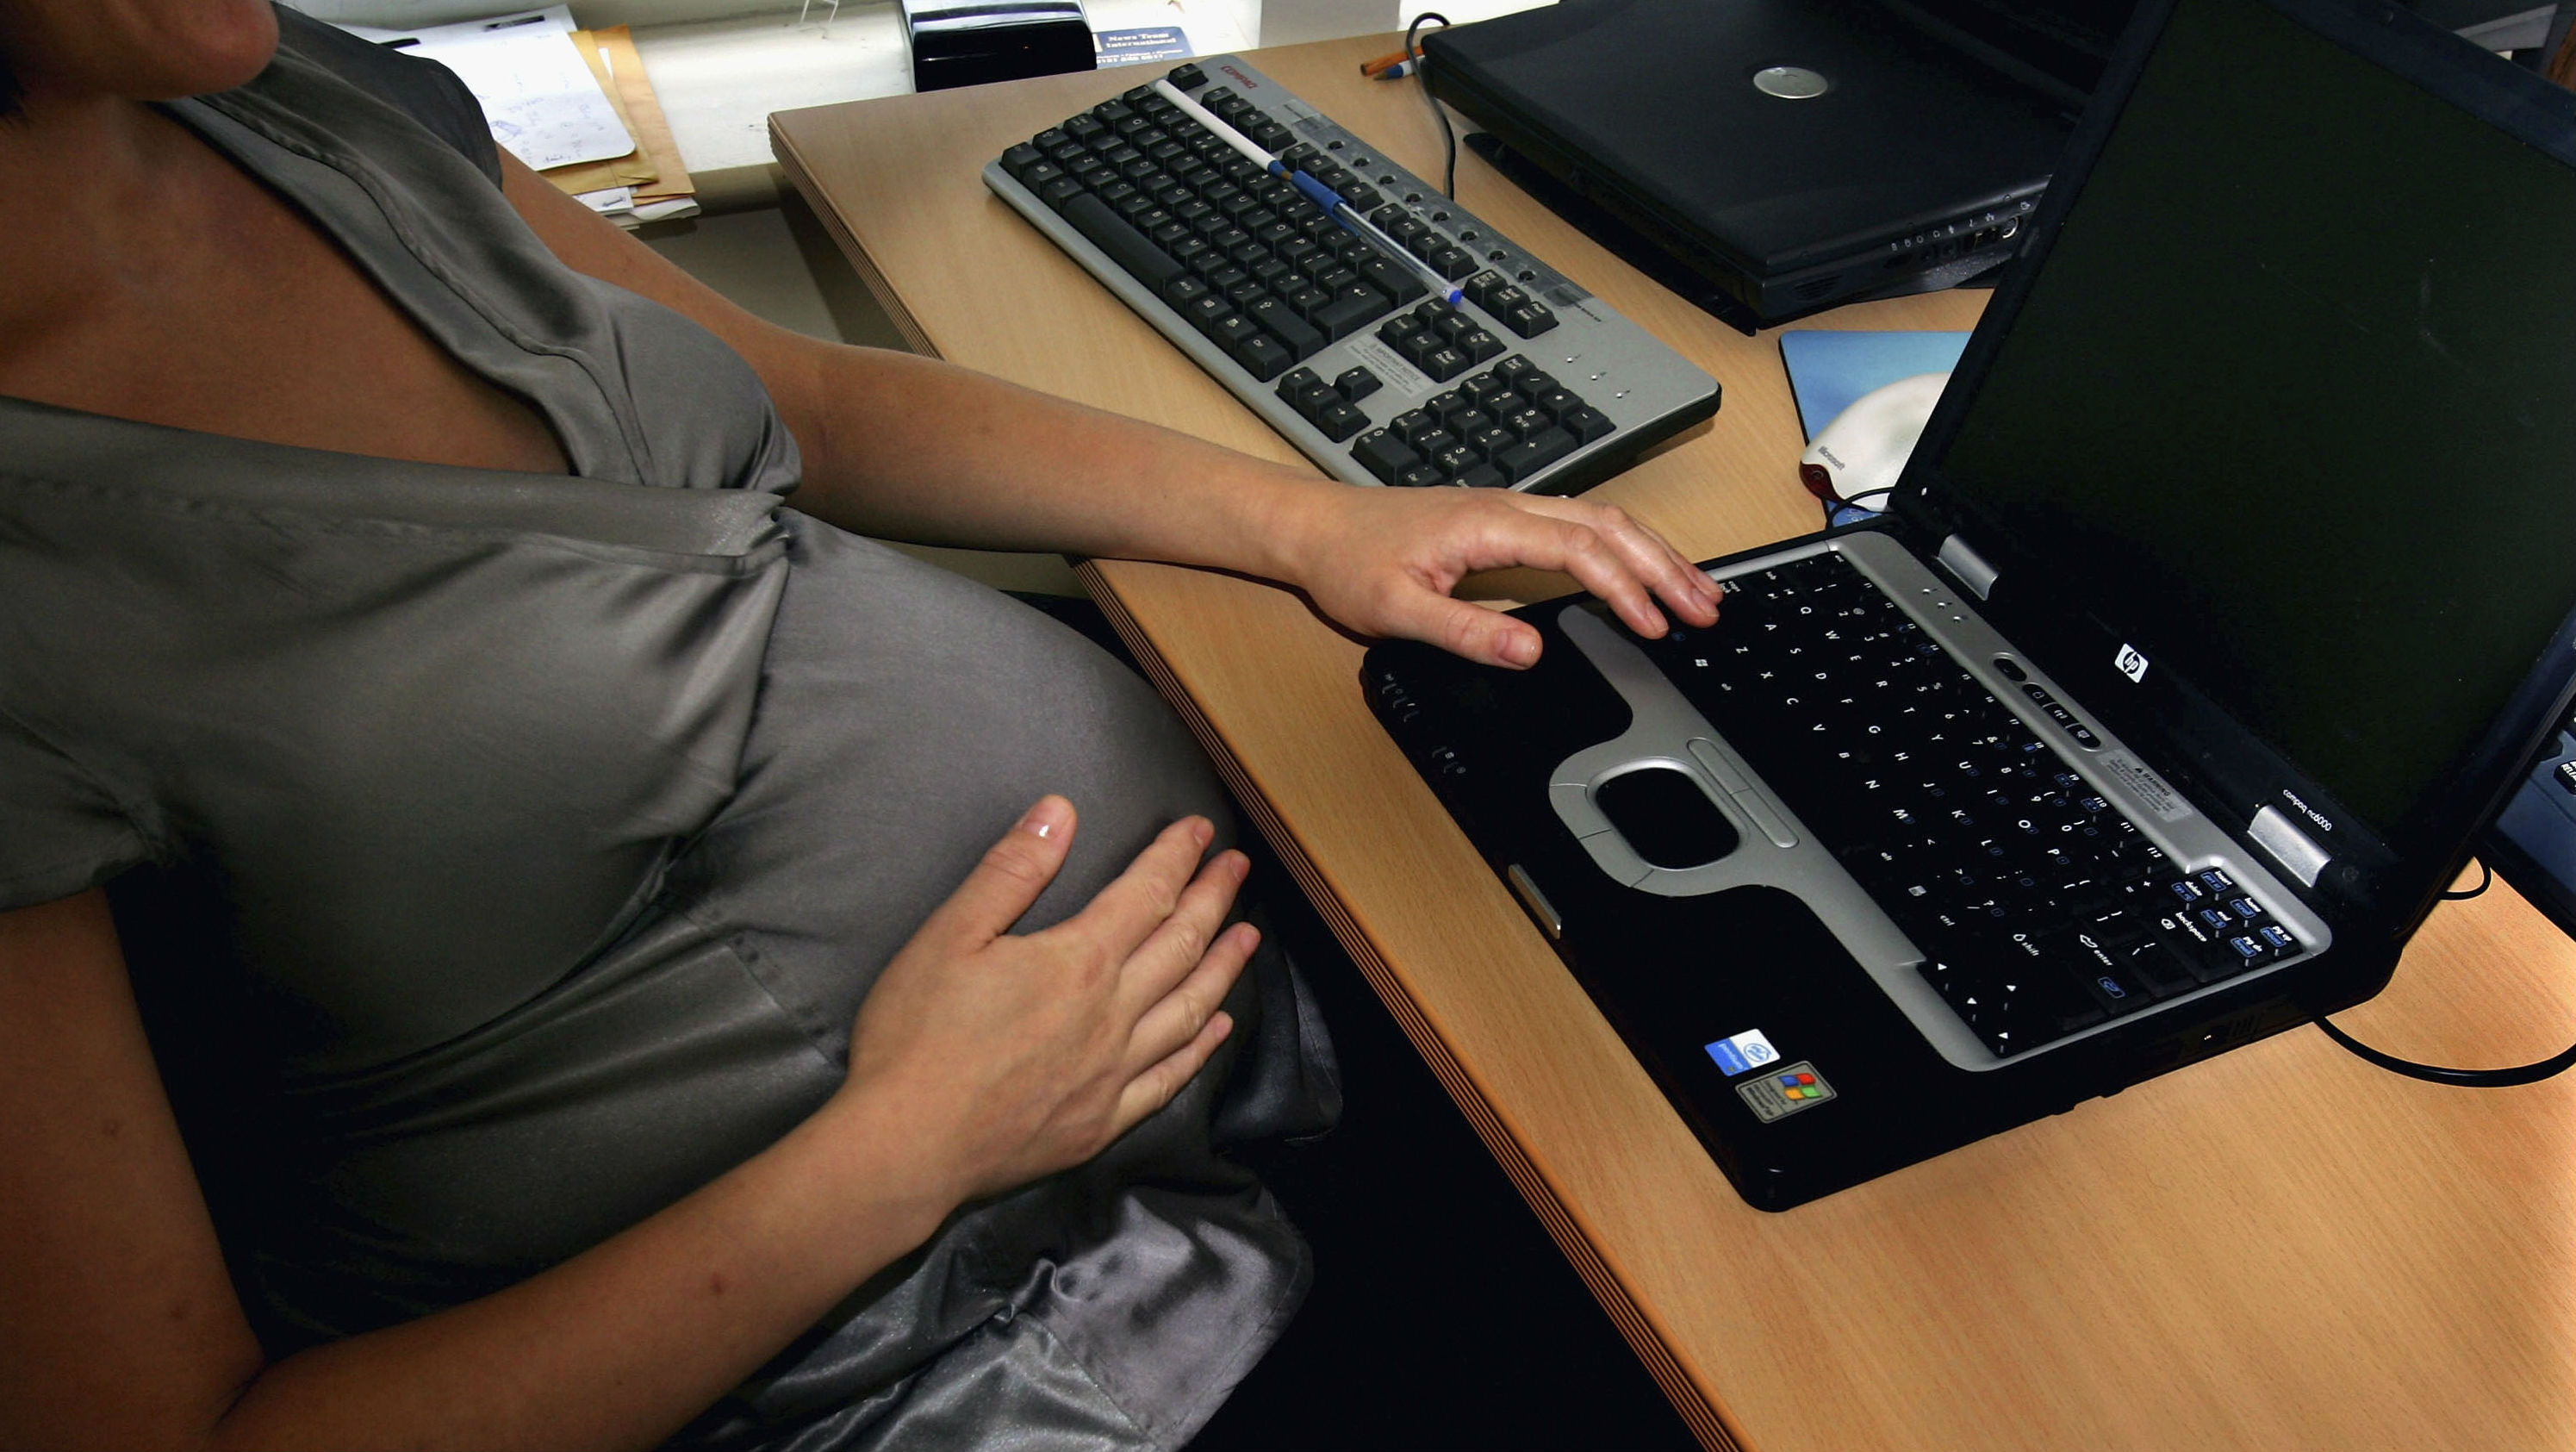 A pregnant woman is seen at the office work station on July 18, 2005 in London, England.